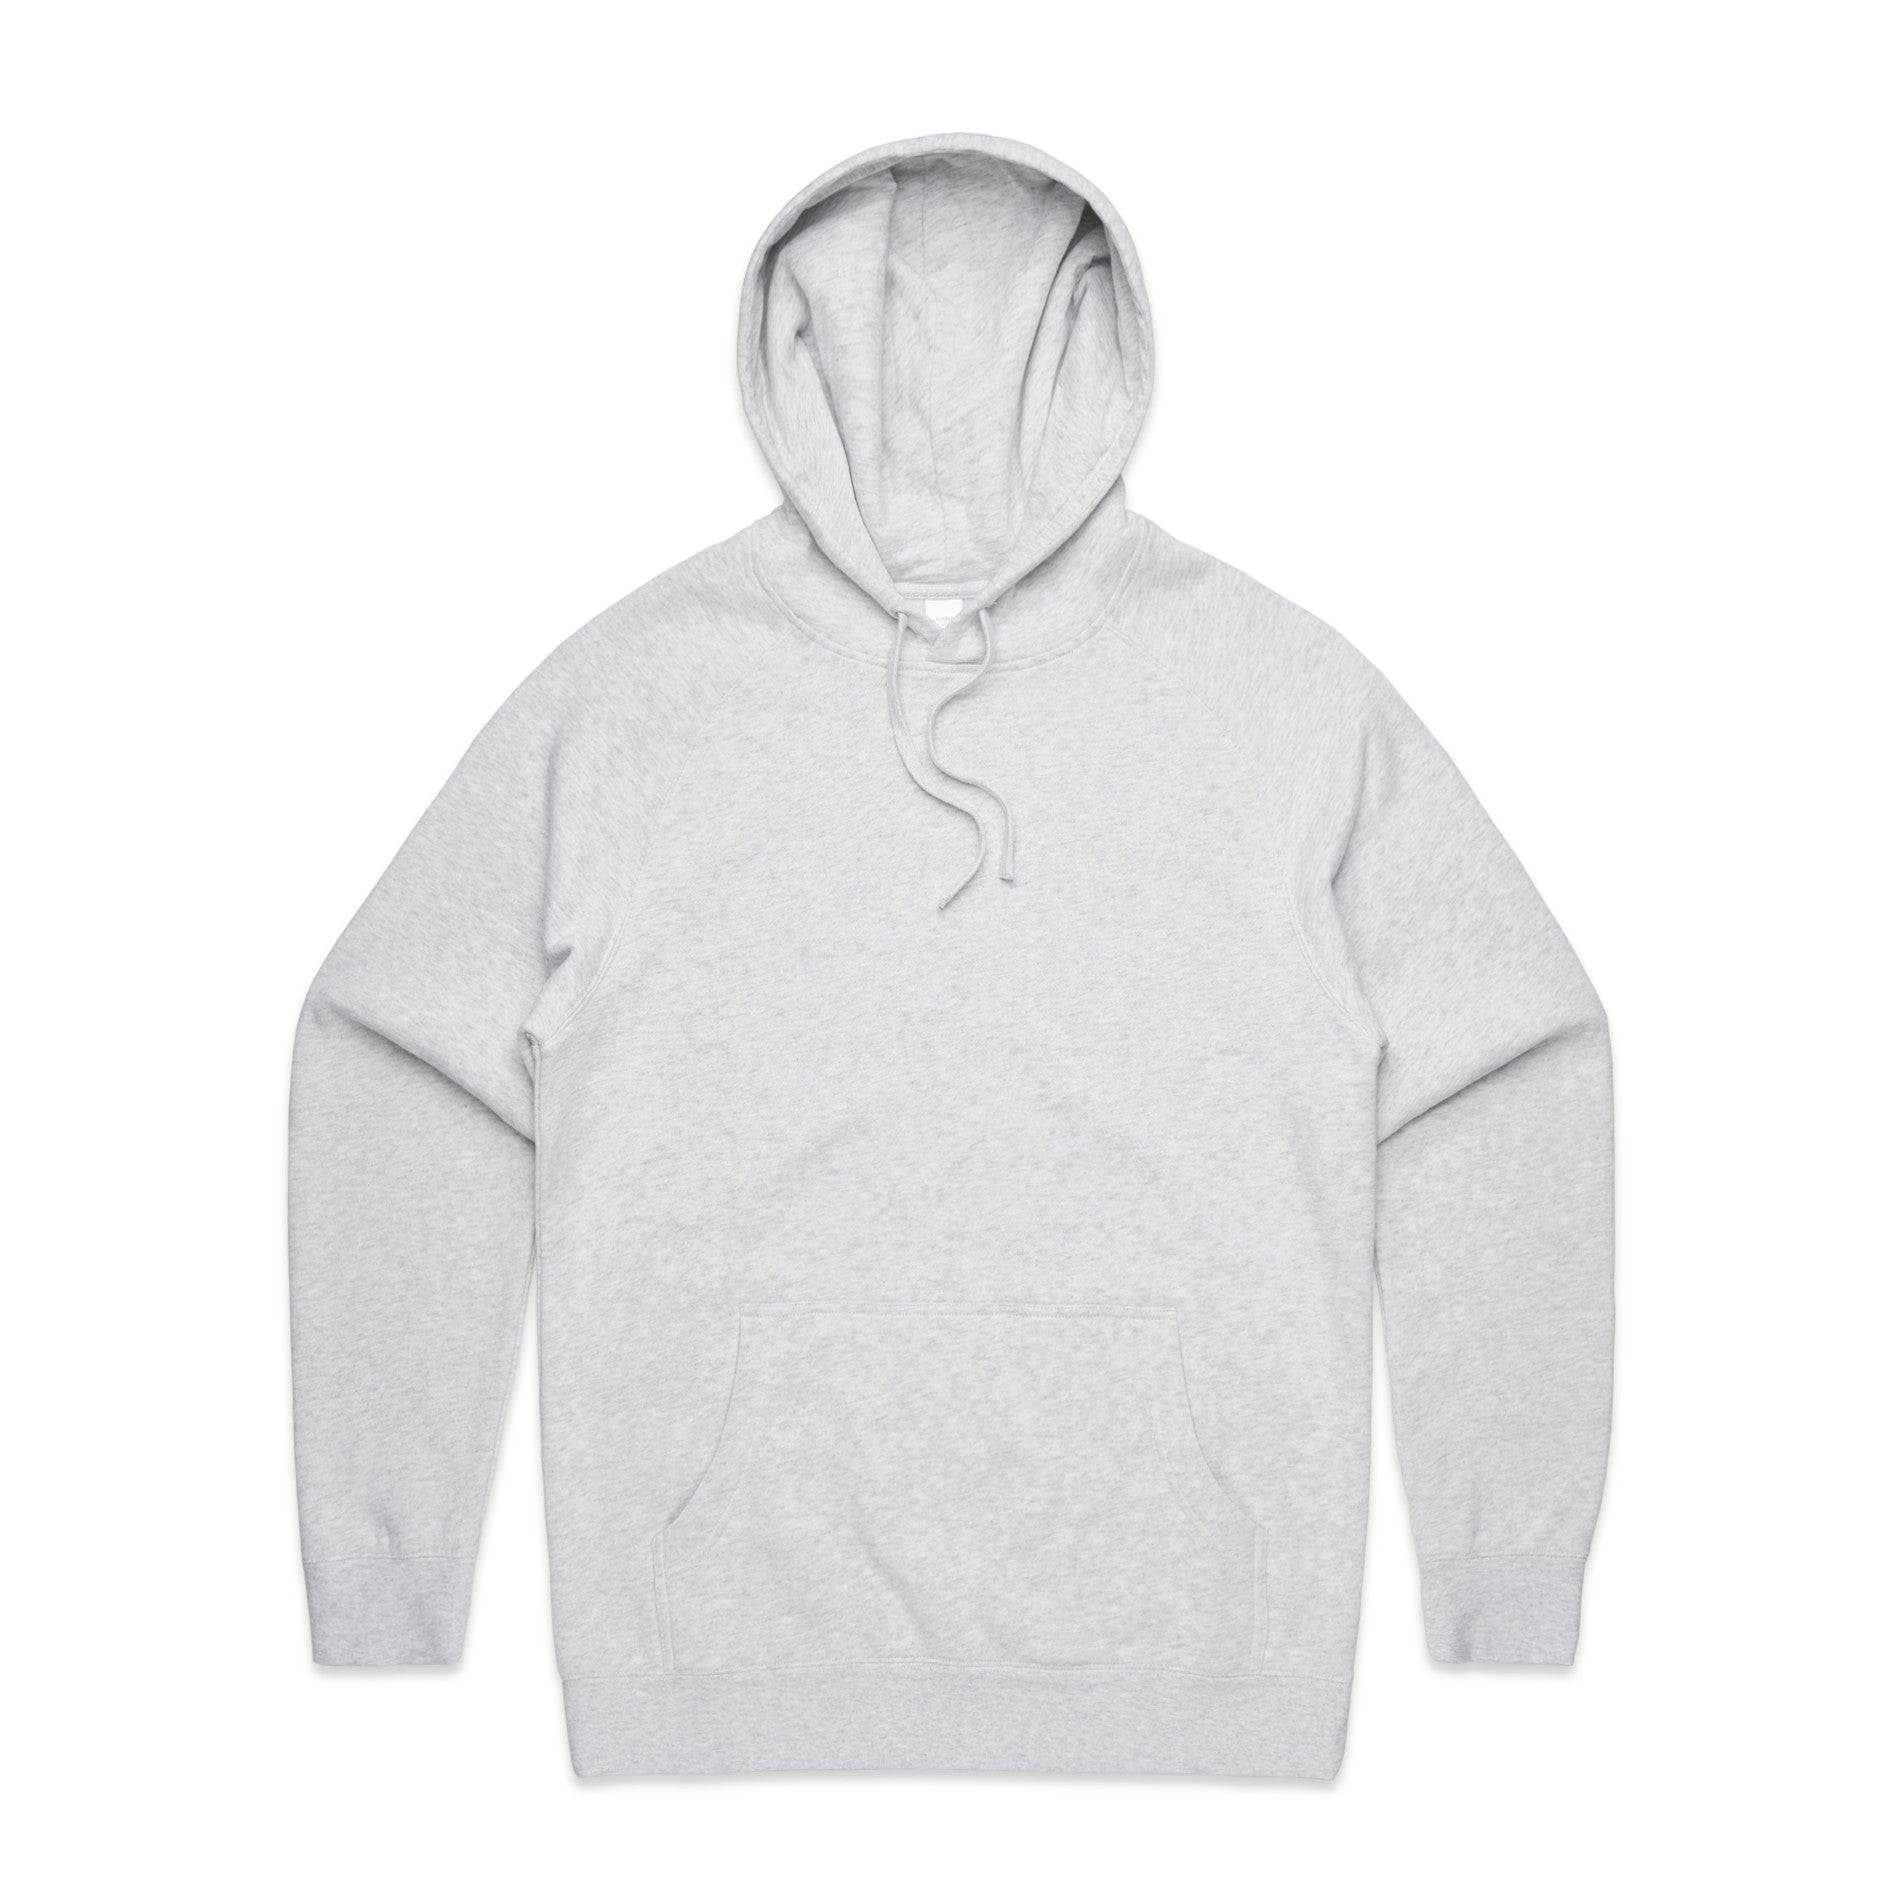 Ascolour Mens Supply Hood 2nd color (5101)